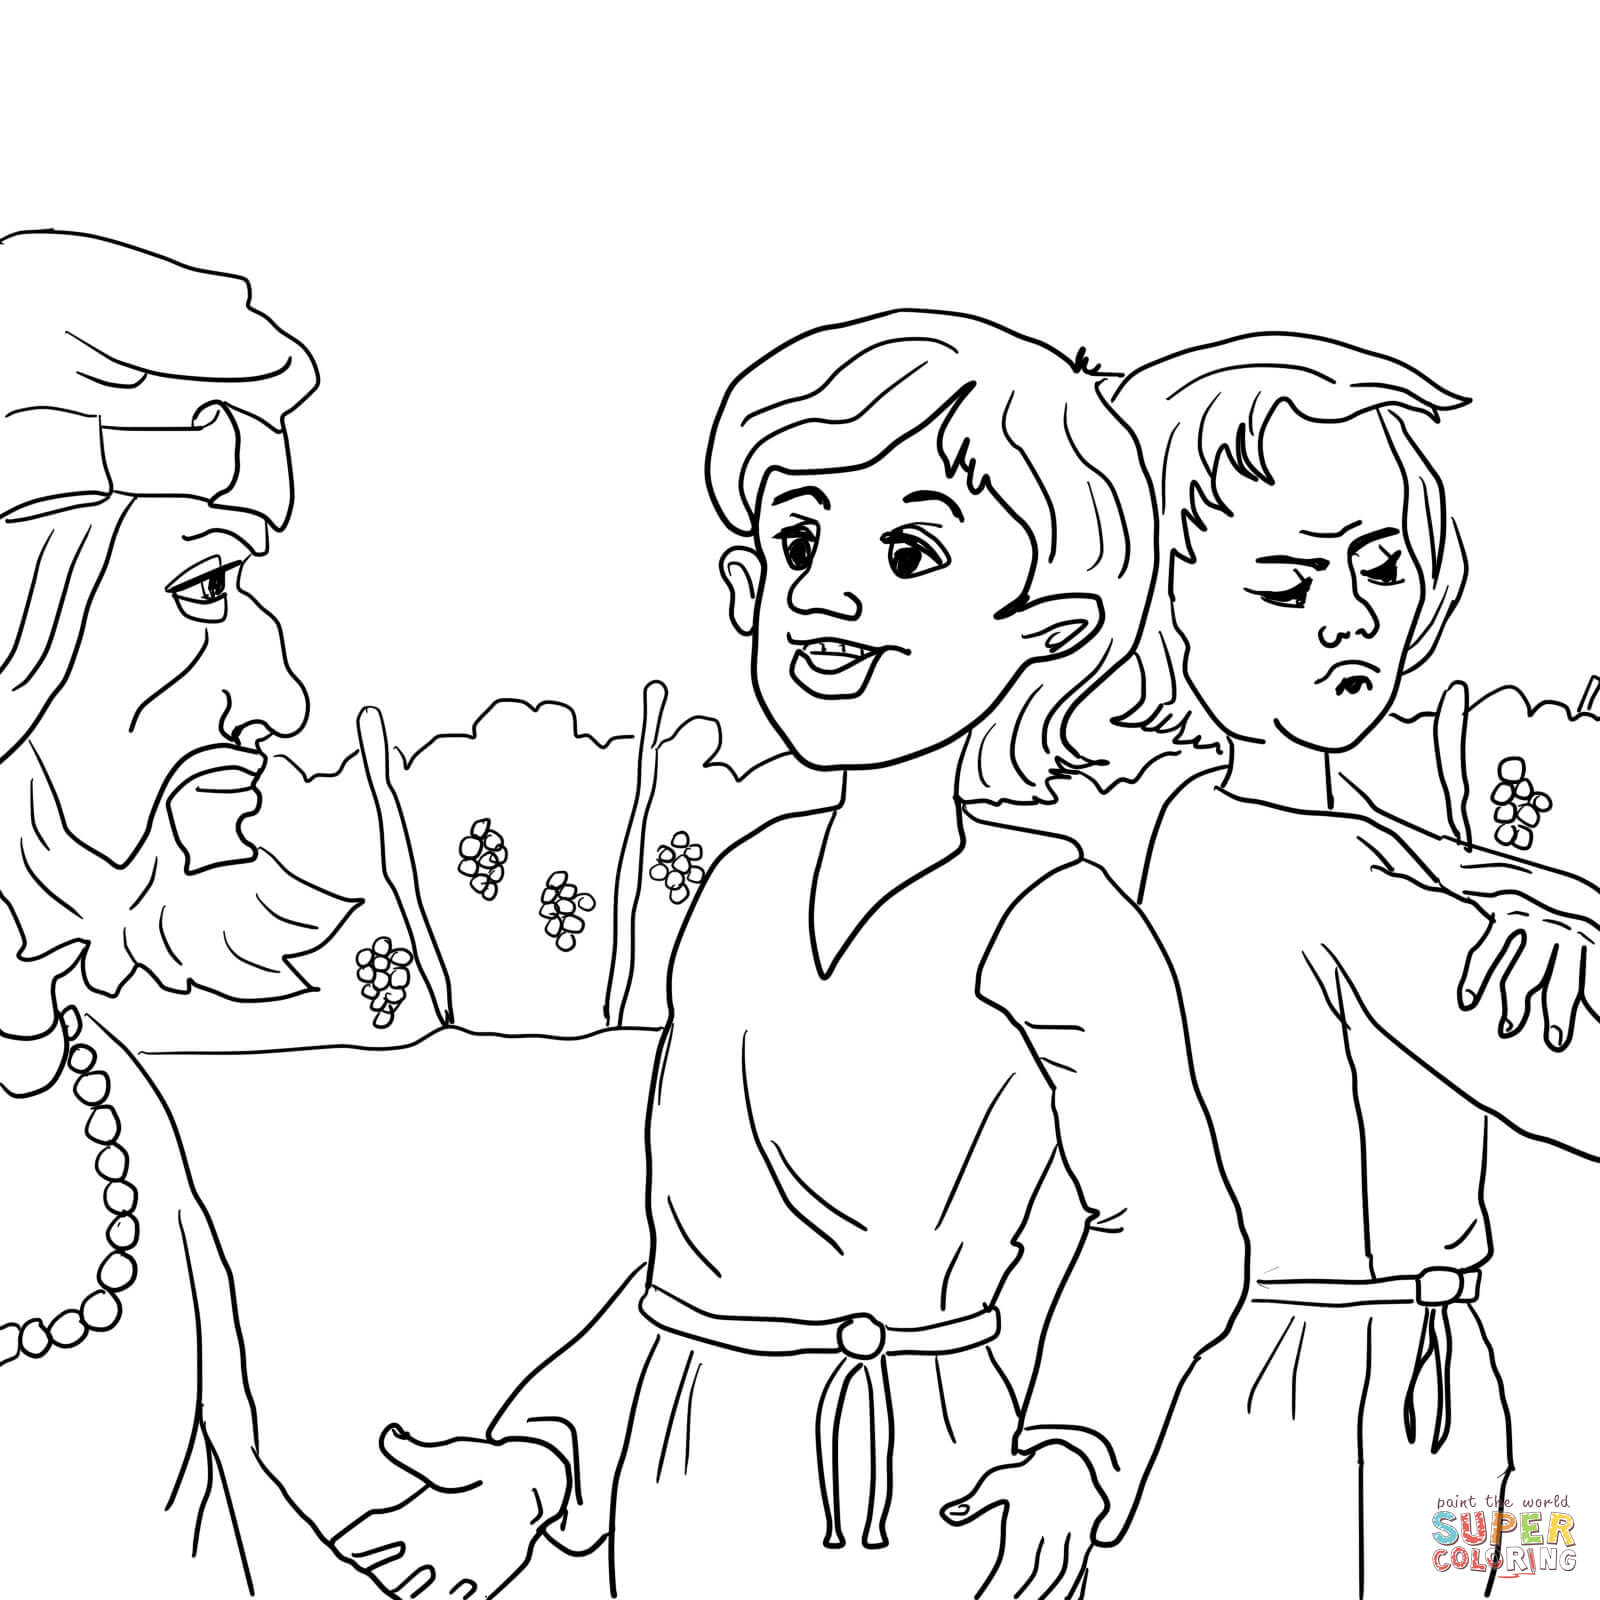 lost coin coloring page